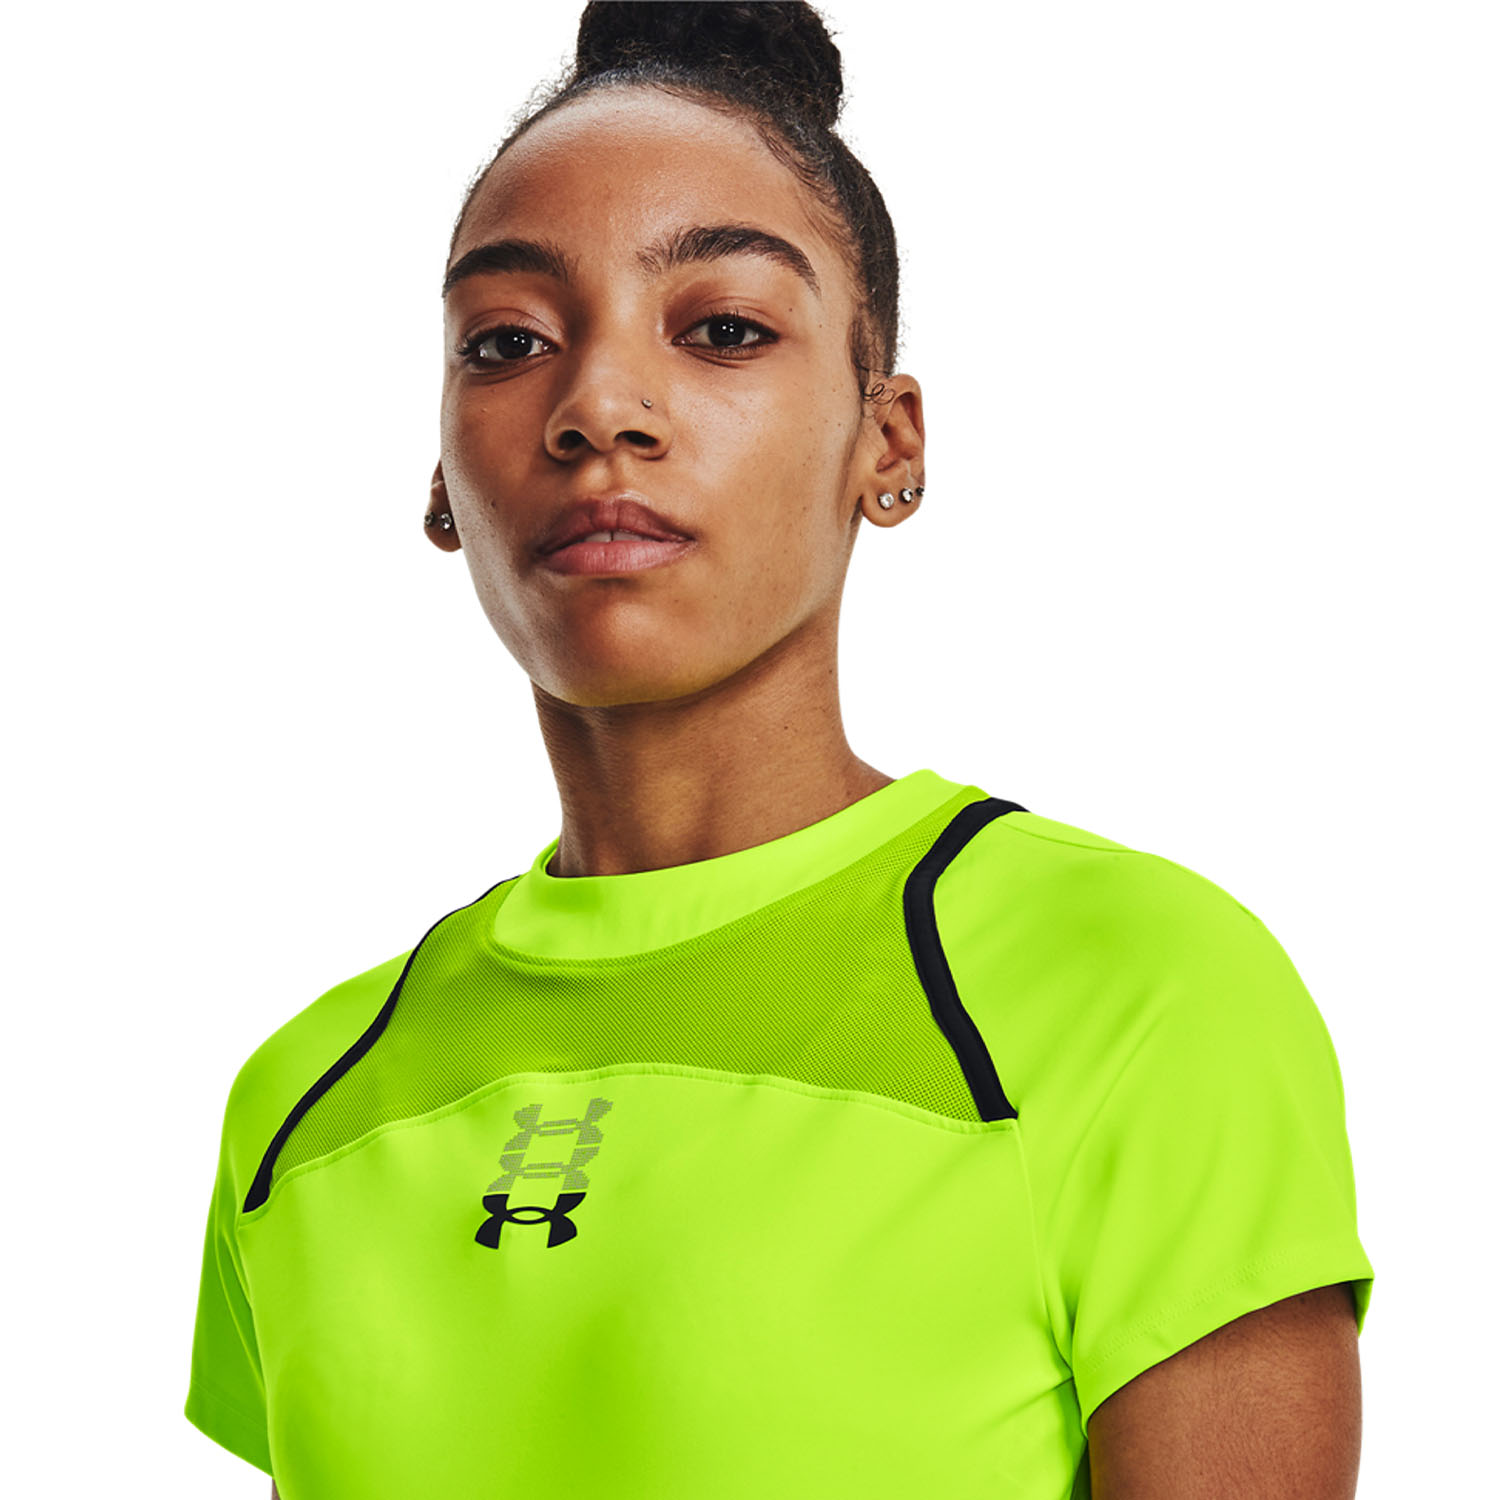 Under Armour Anywhere T-Shirt - Lime Surge/Black